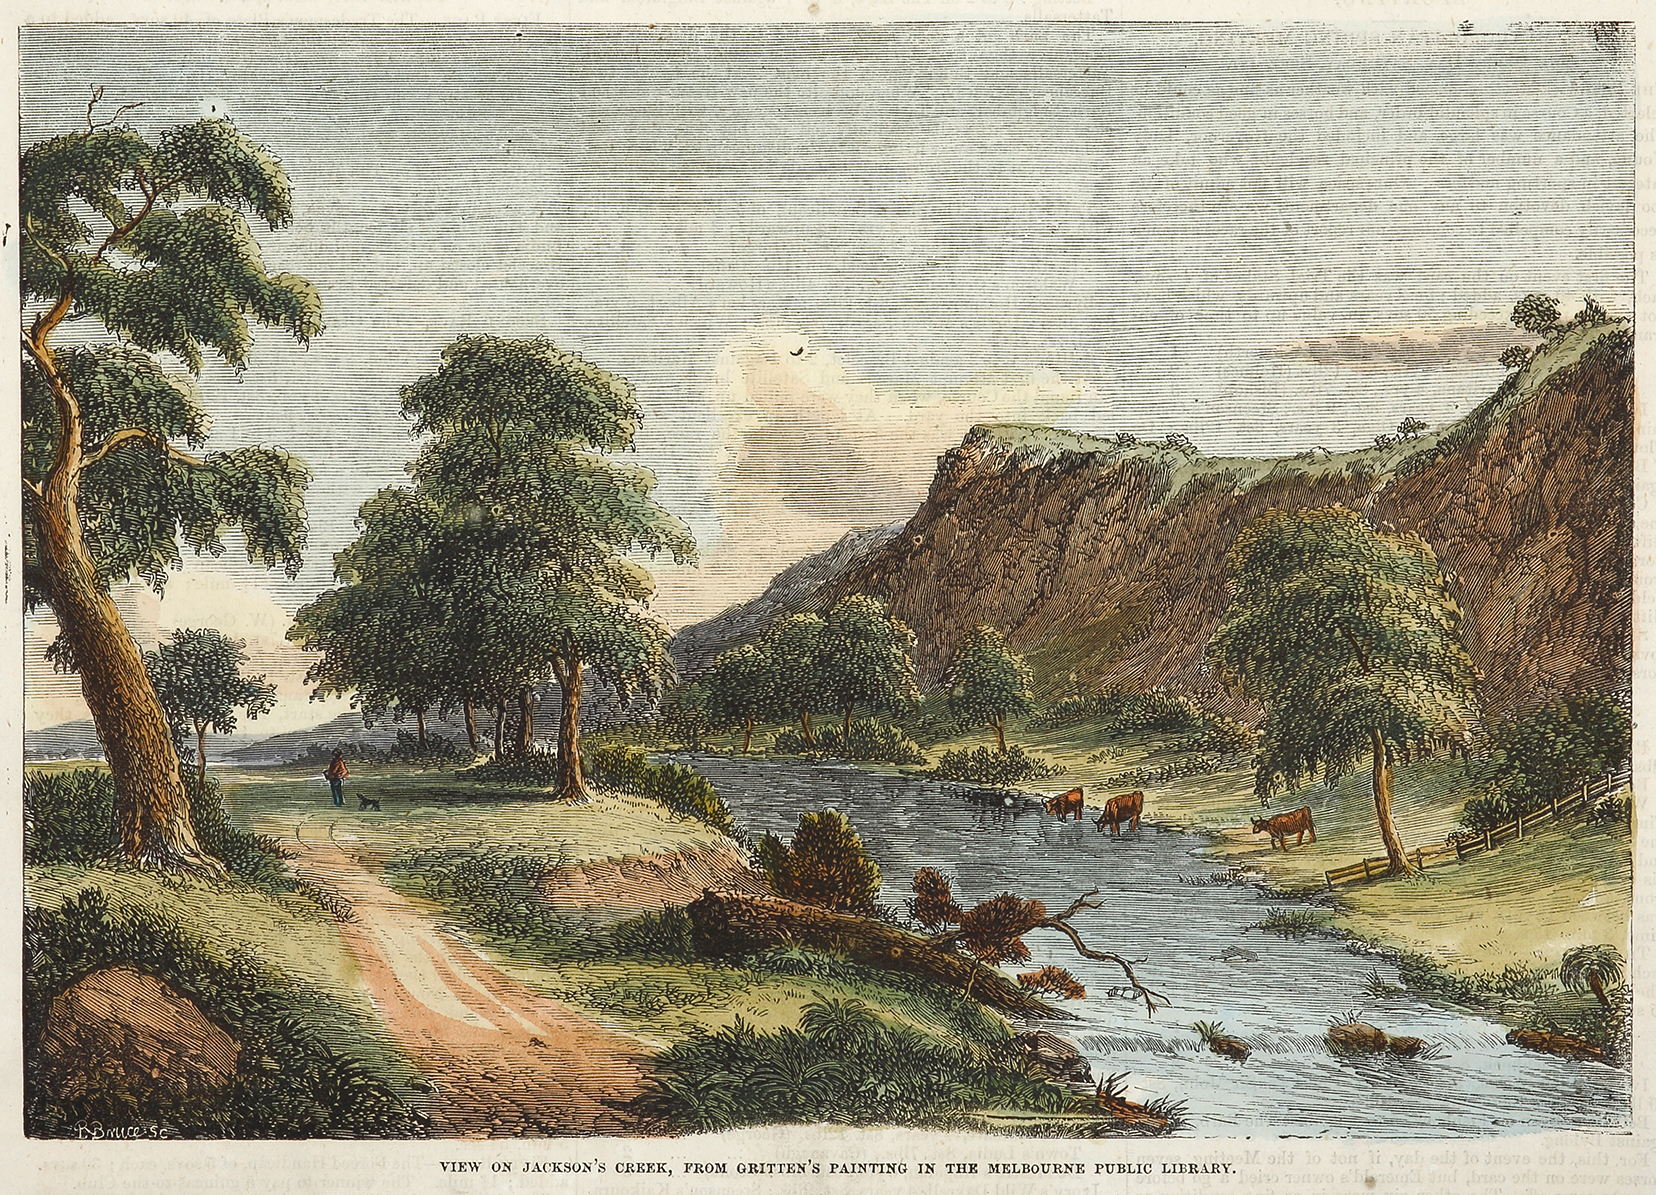 View on Jackson's Creek, from Gritten's Painting in the Melbourne Public Library. - Antique Print from 1866